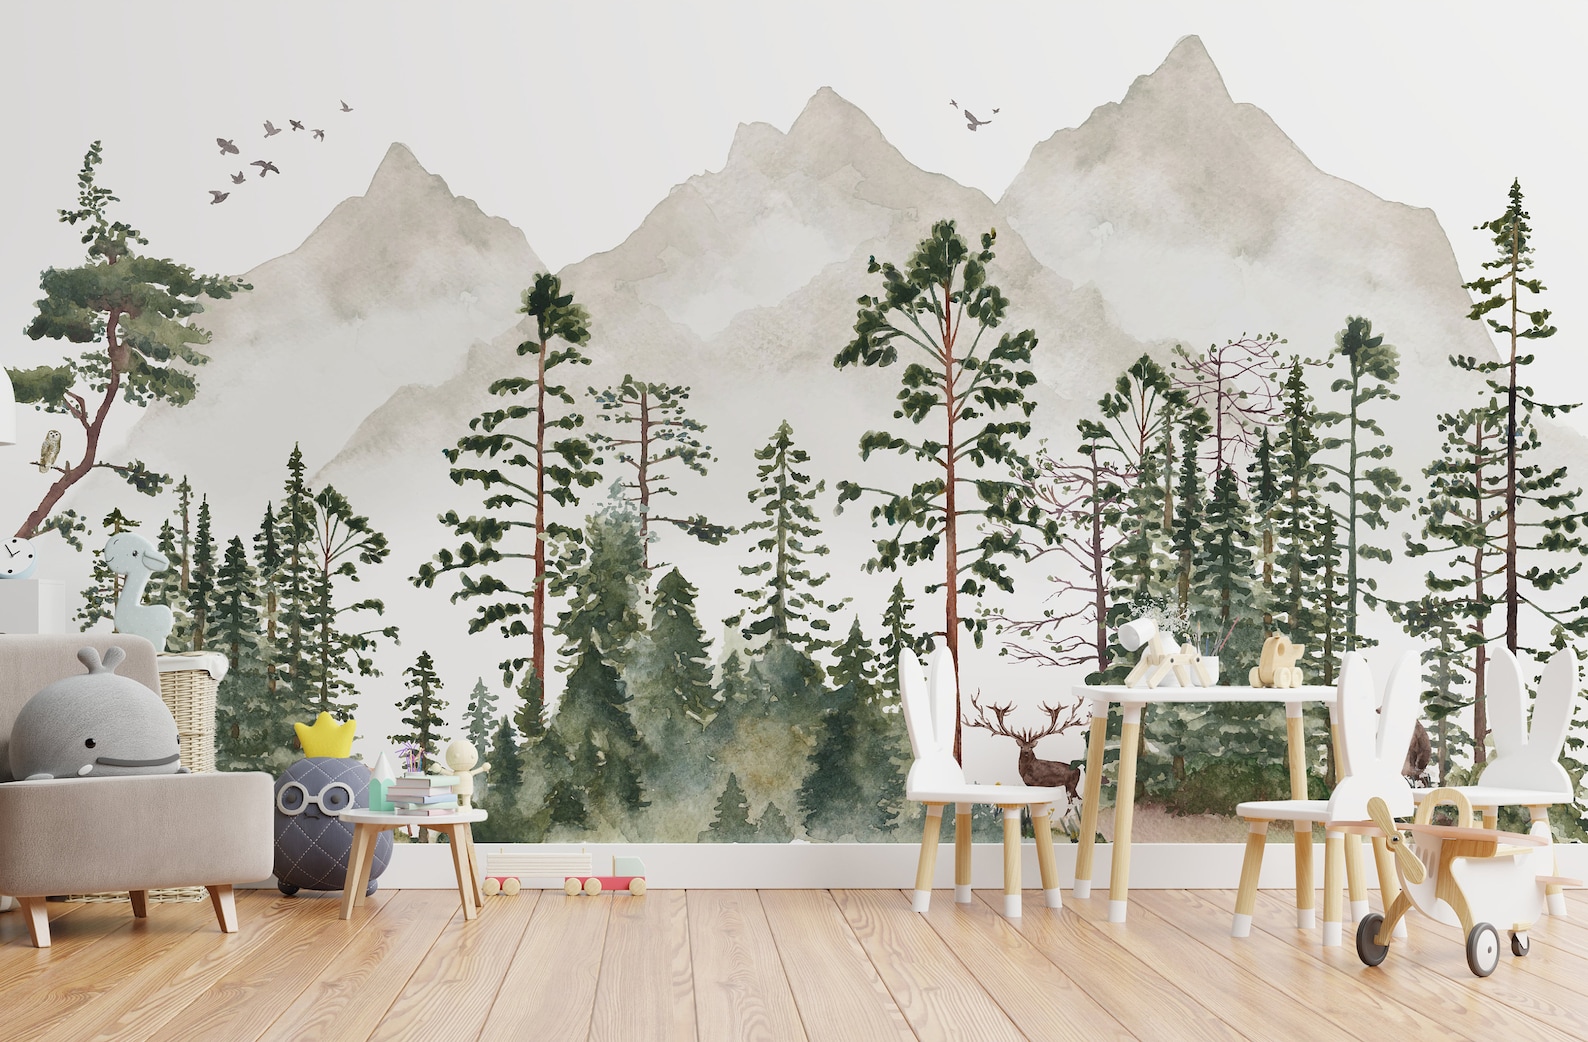 Forest wall mural Peel-n-Stick wallpaper Pine tree Woodland | Etsy